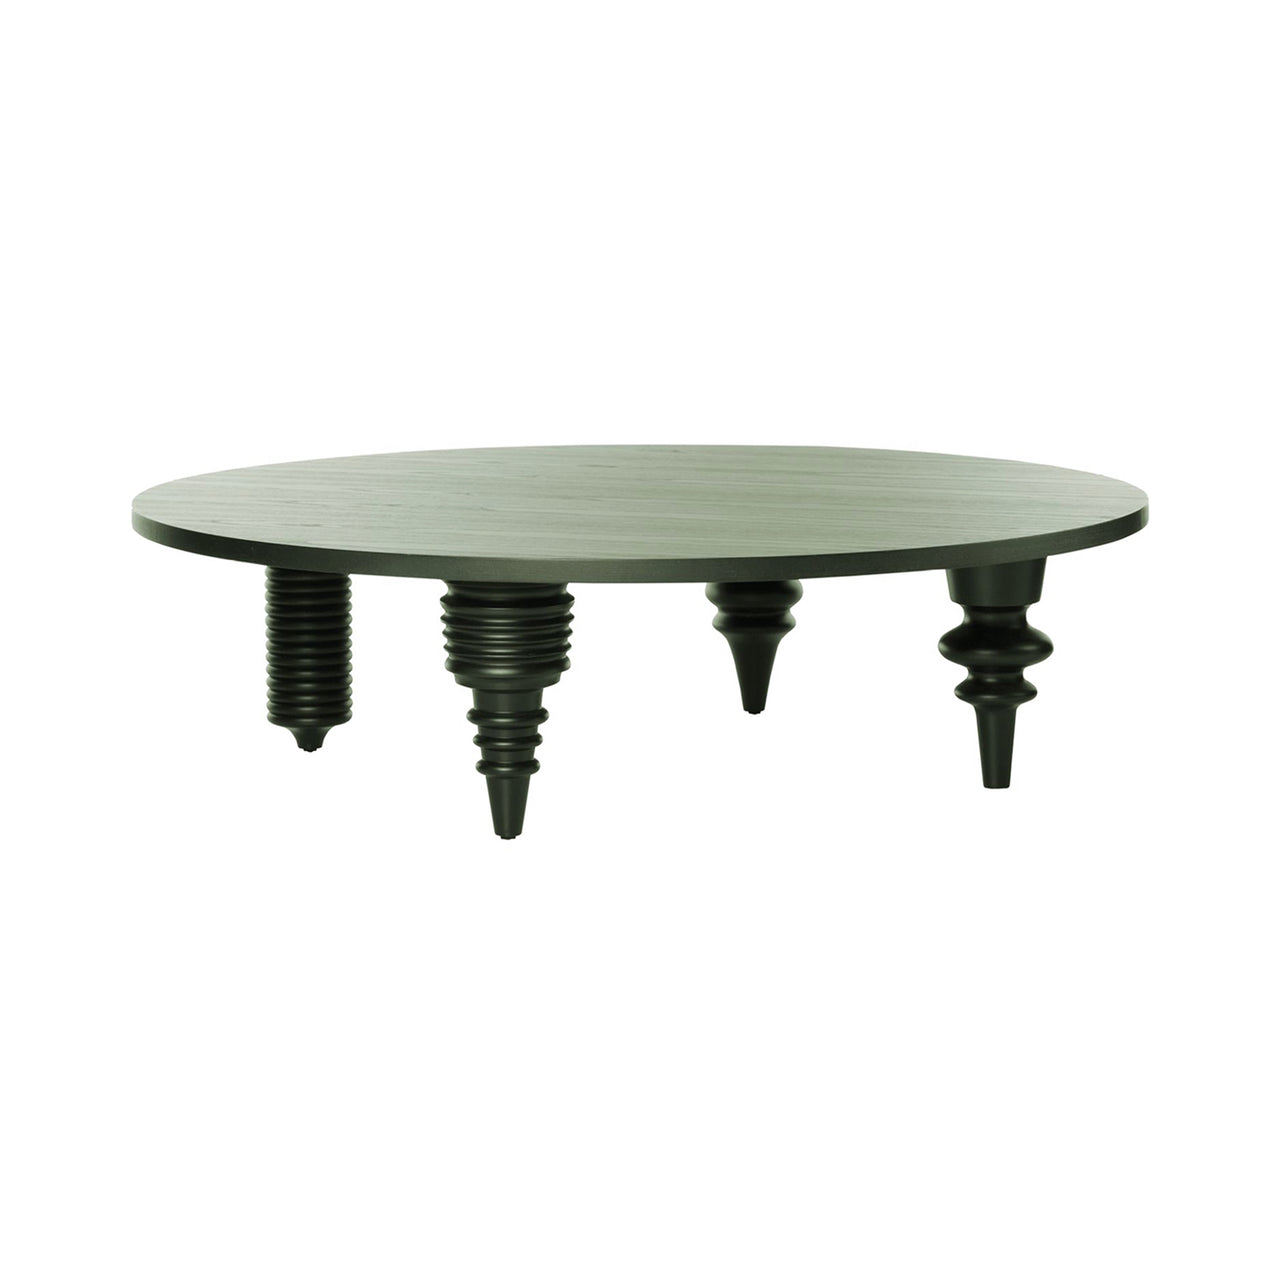 Multileg Low Table: Olive Green Stained Ash